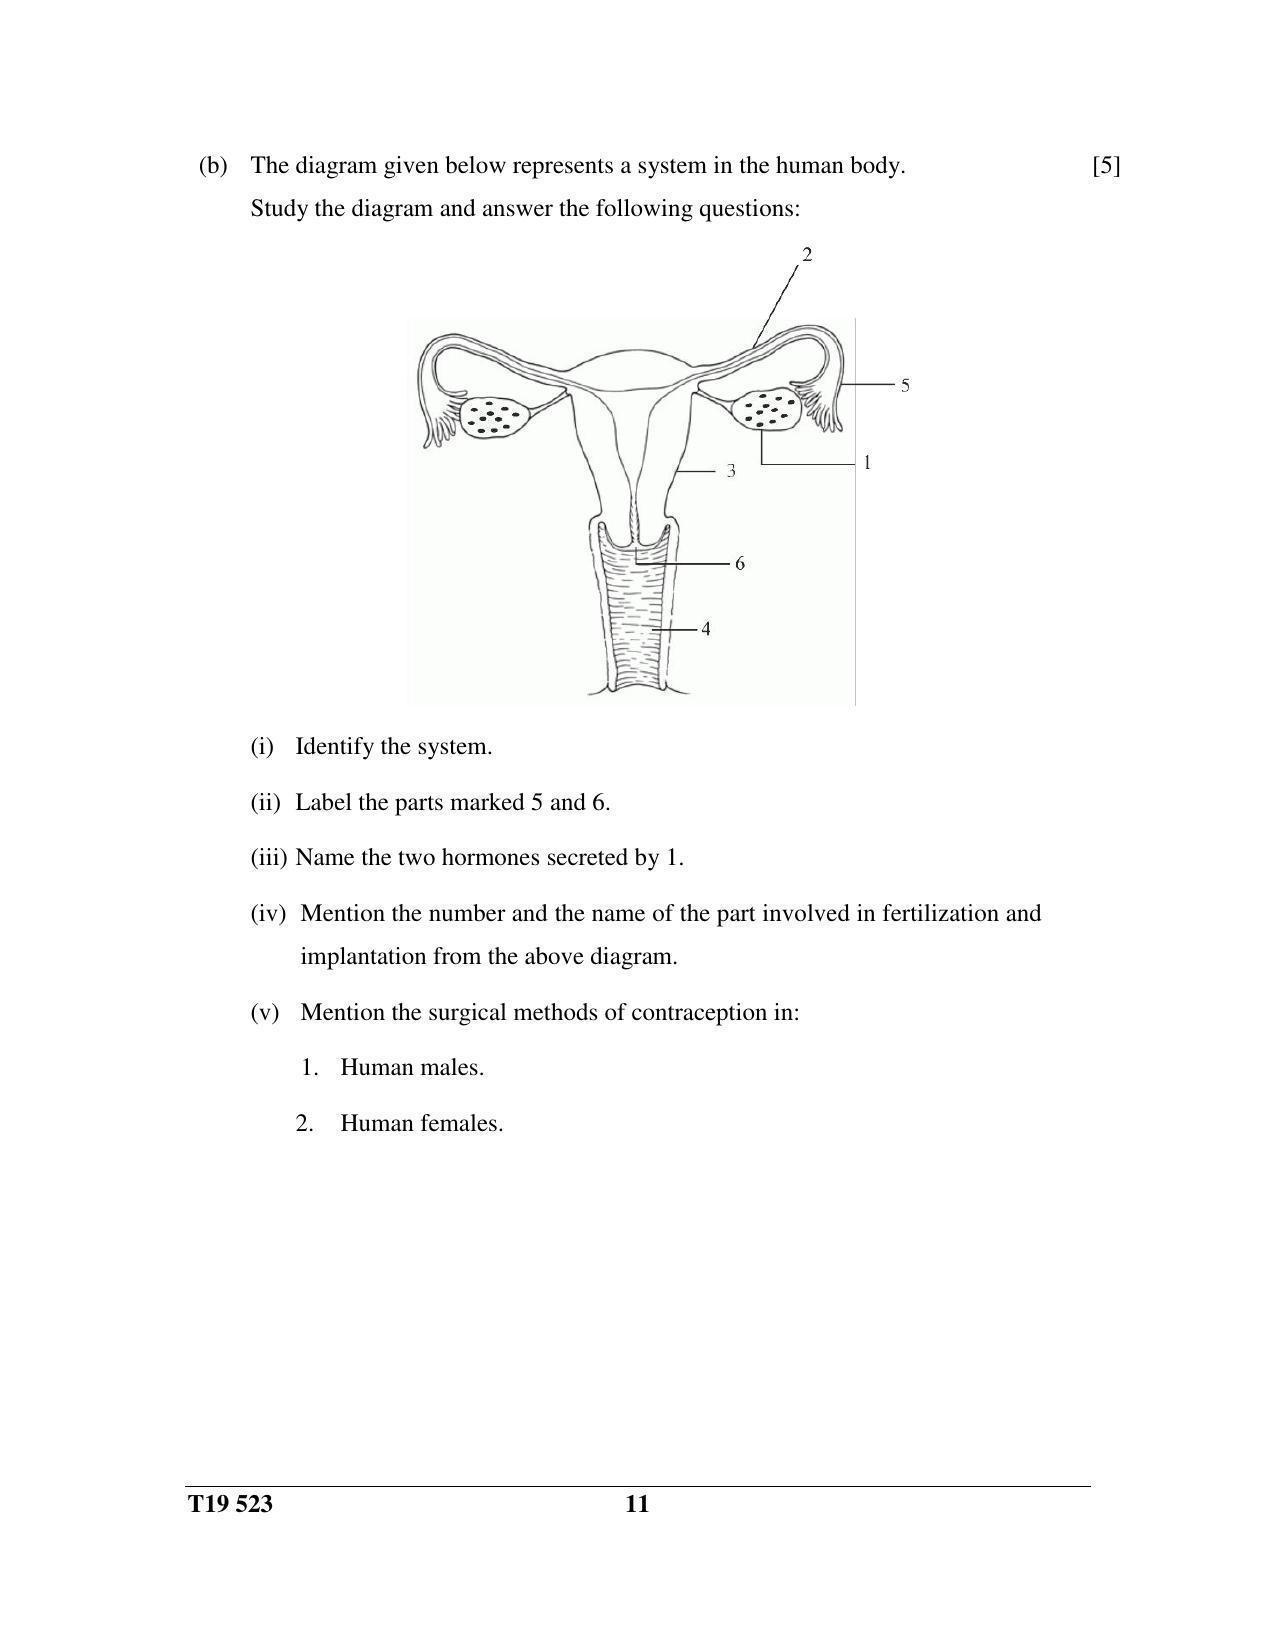 ICSE Class 10 Science Paper 3 (Biology) 2019 Question Paper - Page 11